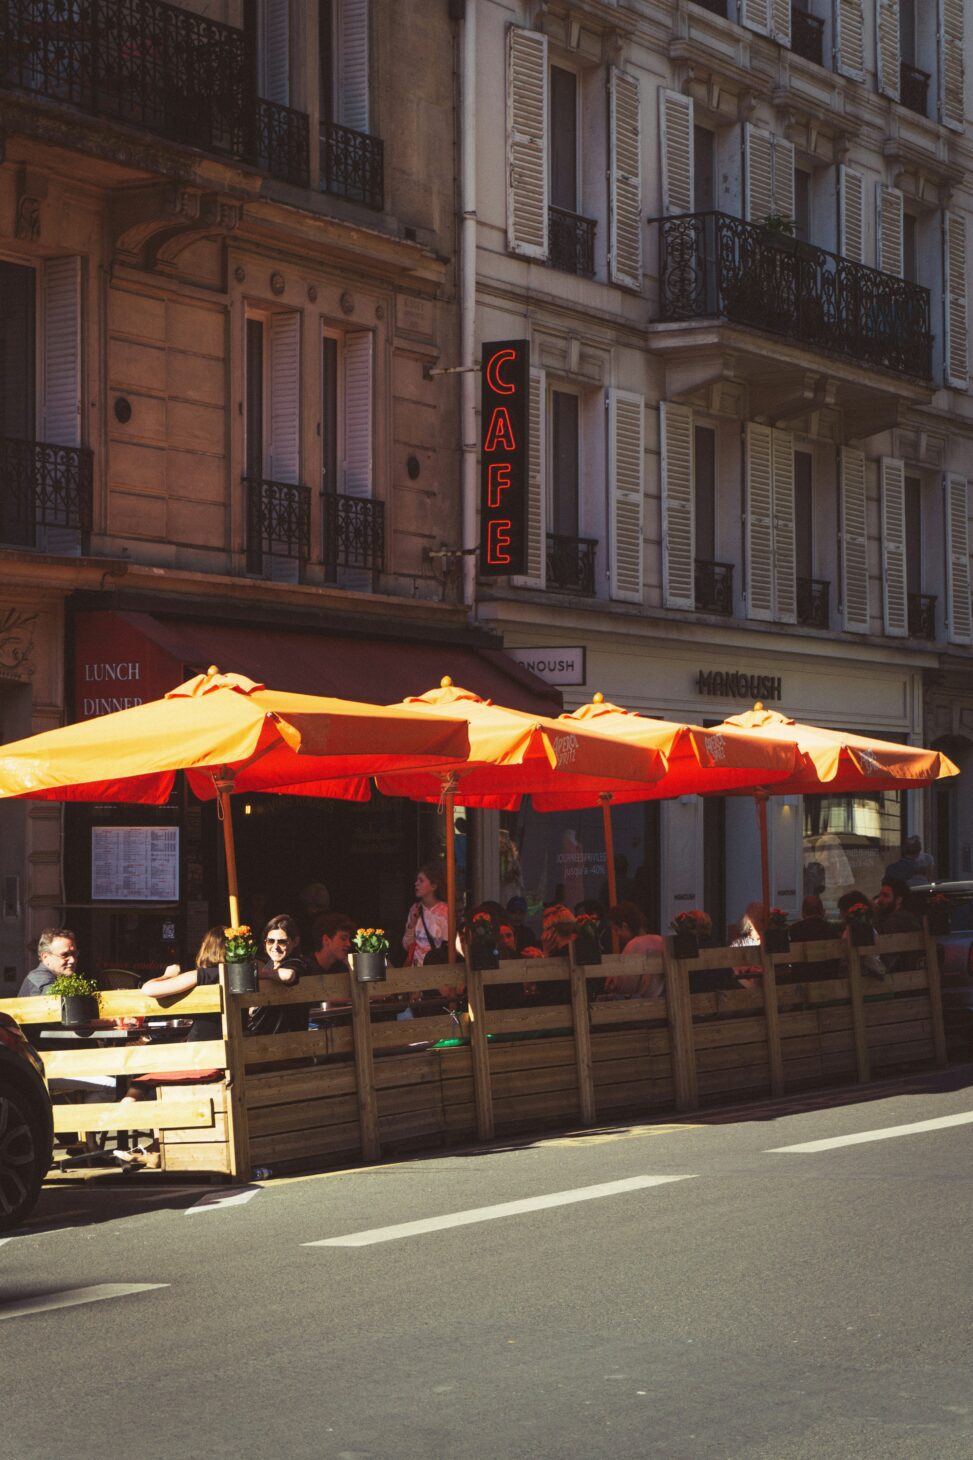 People converse at tables under large umbrellas on a restaurant patio.